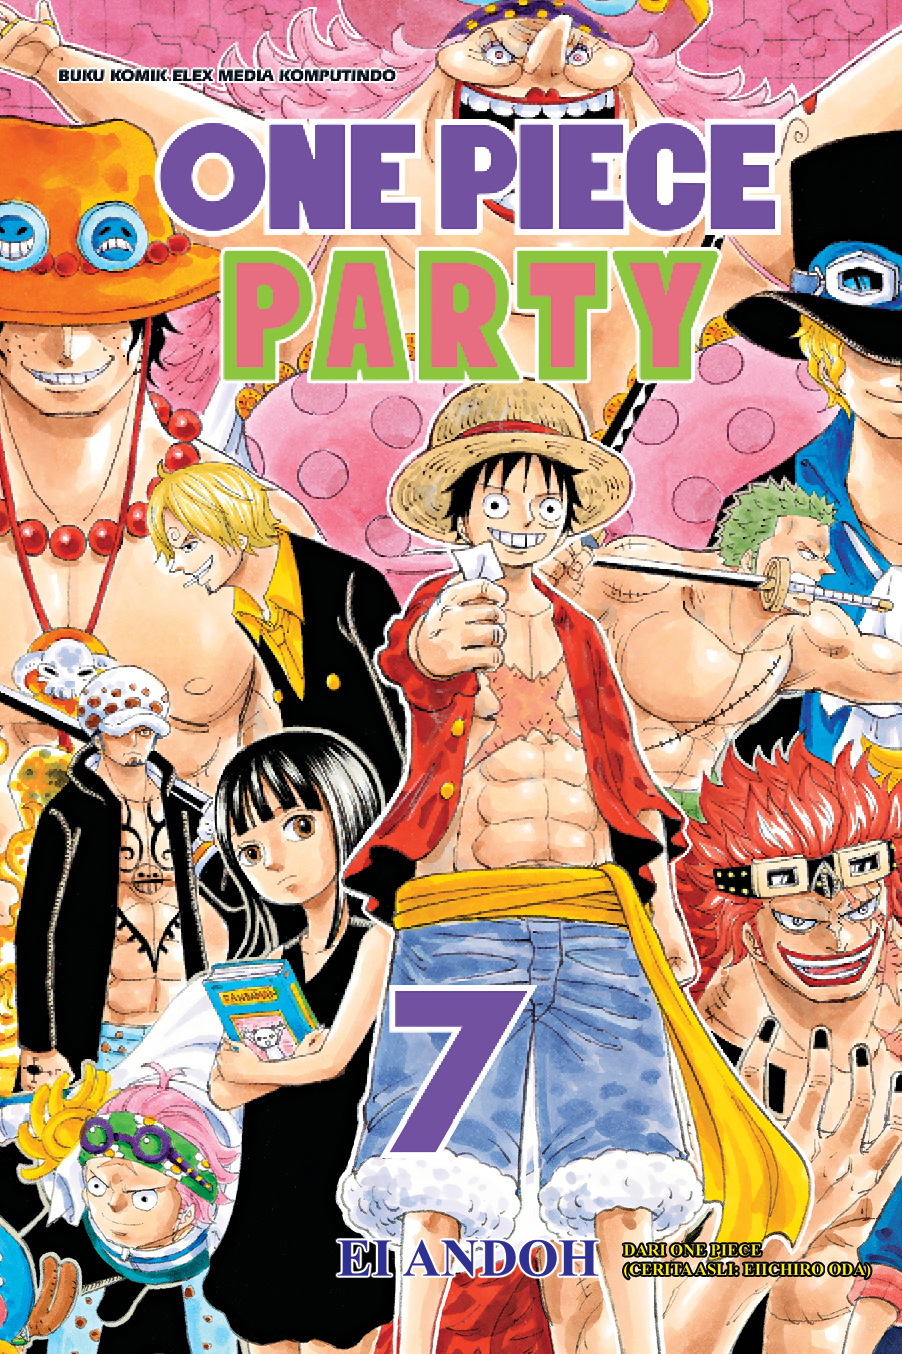 One piece party 7